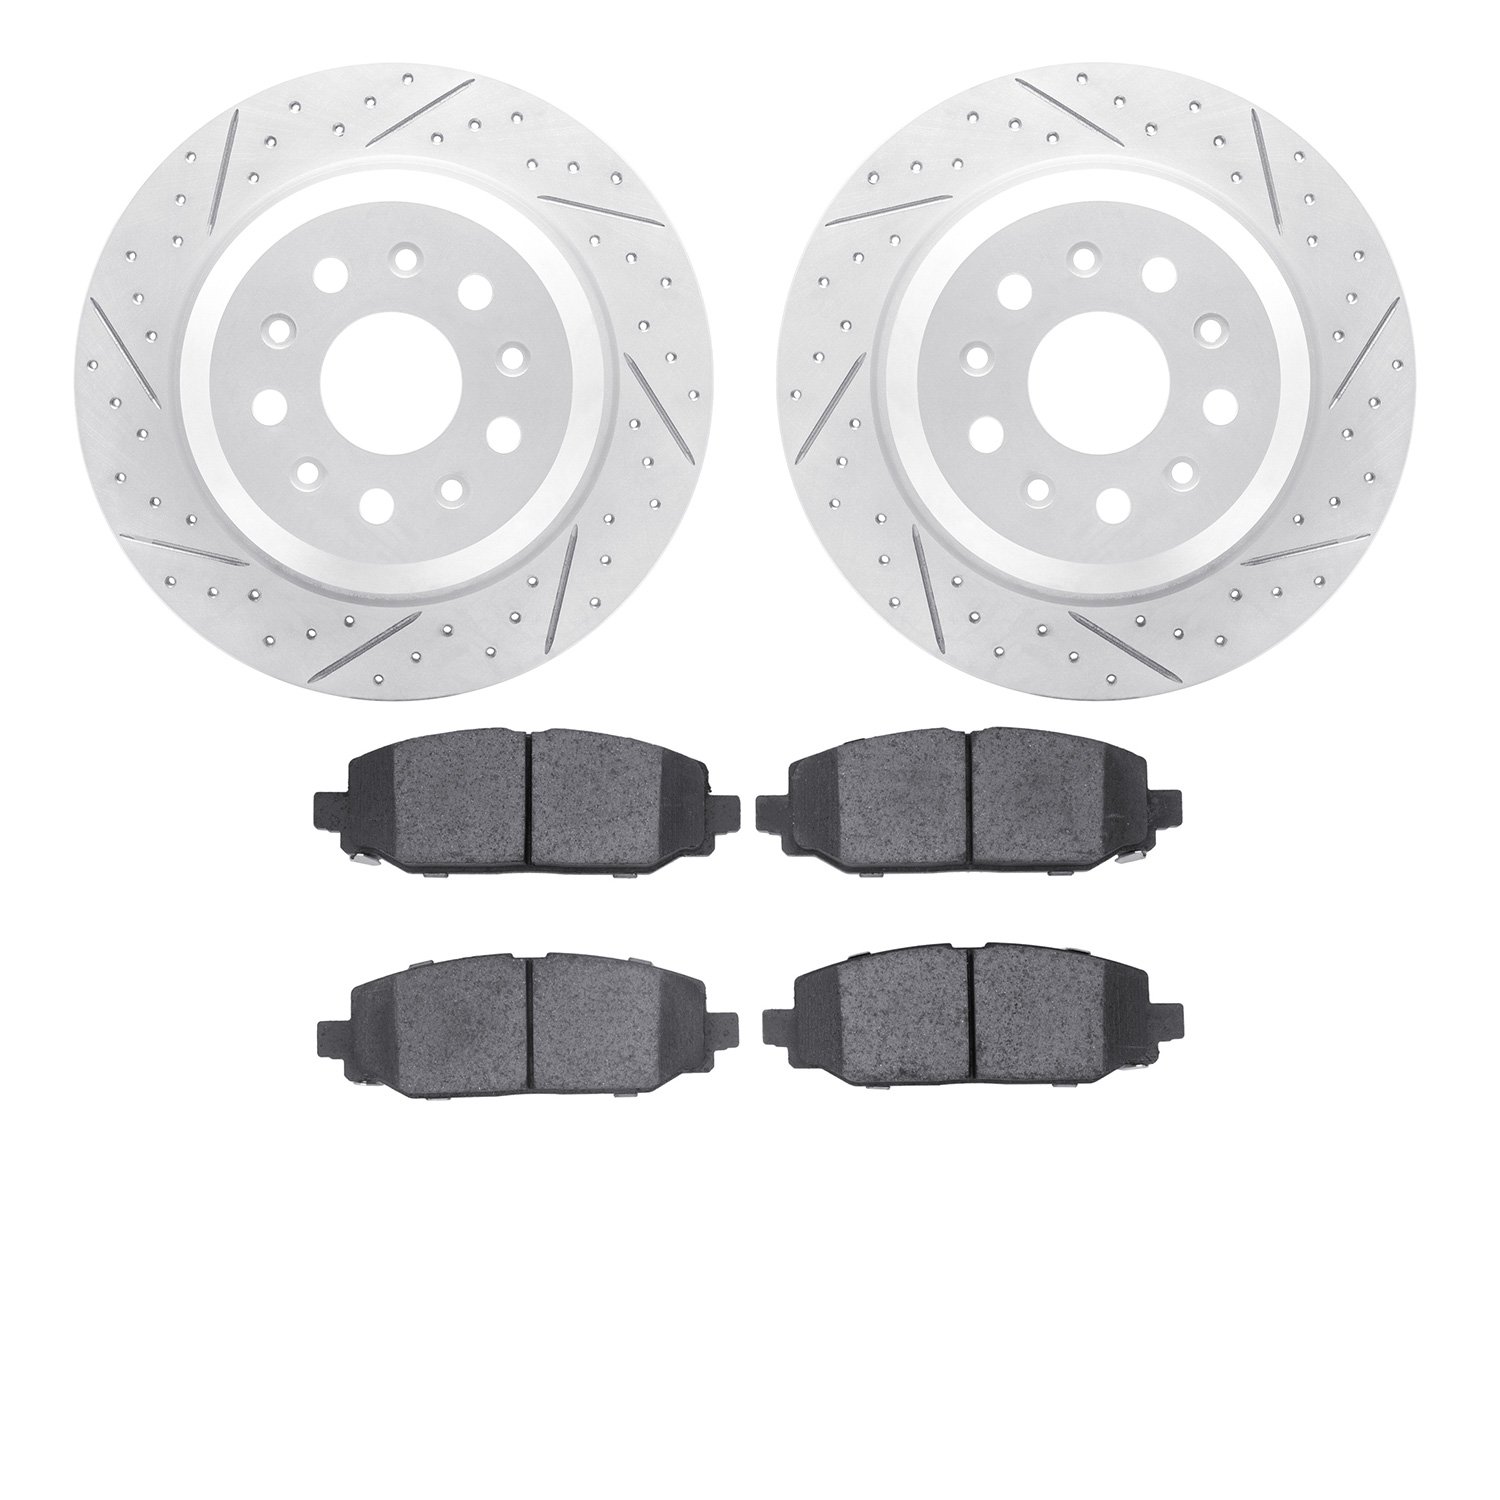 2502-42049 Geoperformance Drilled/Slotted Rotors w/5000 Advanced Brake Pads Kit, Fits Select Mopar, Position: Rear